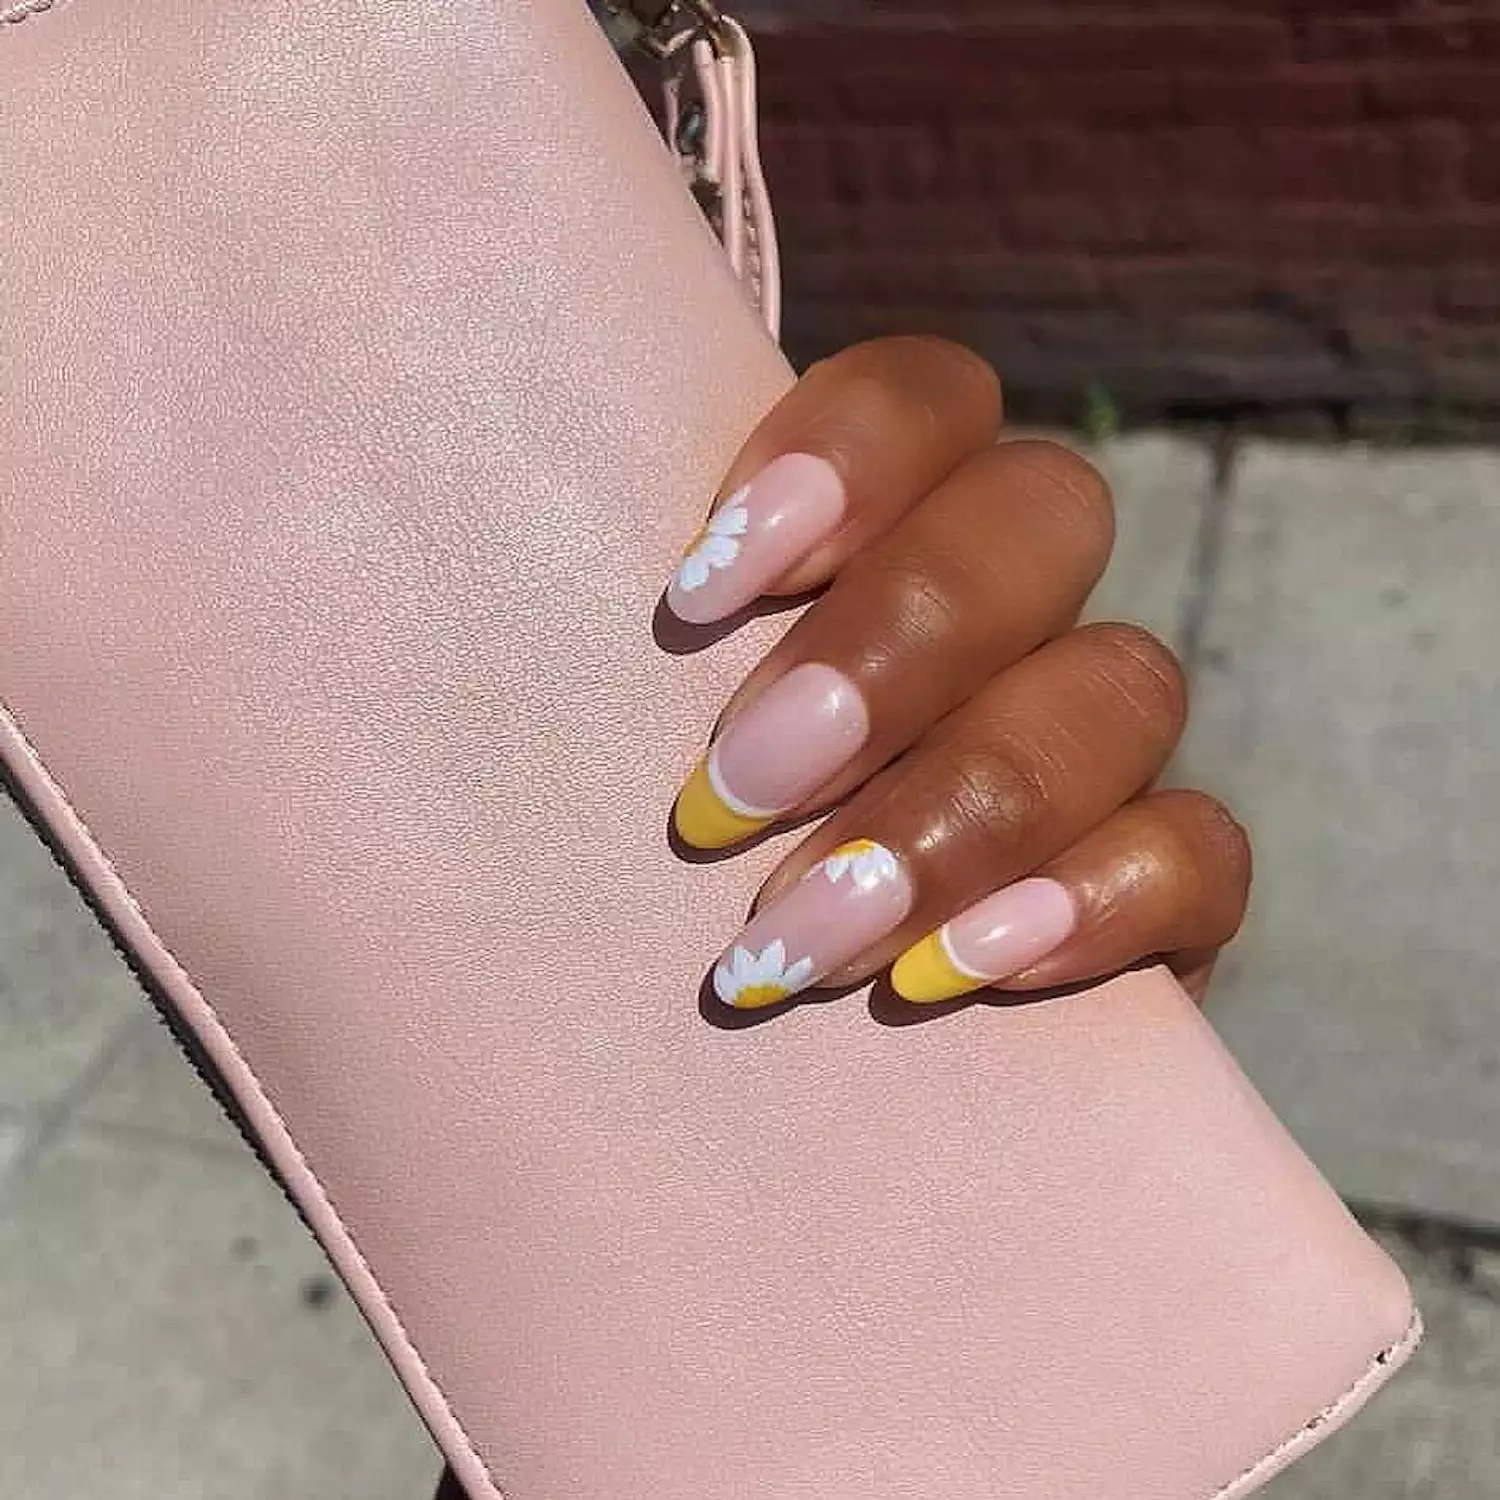 Manicure with pale pink base, yellow French tips, and white and yellow floral designs